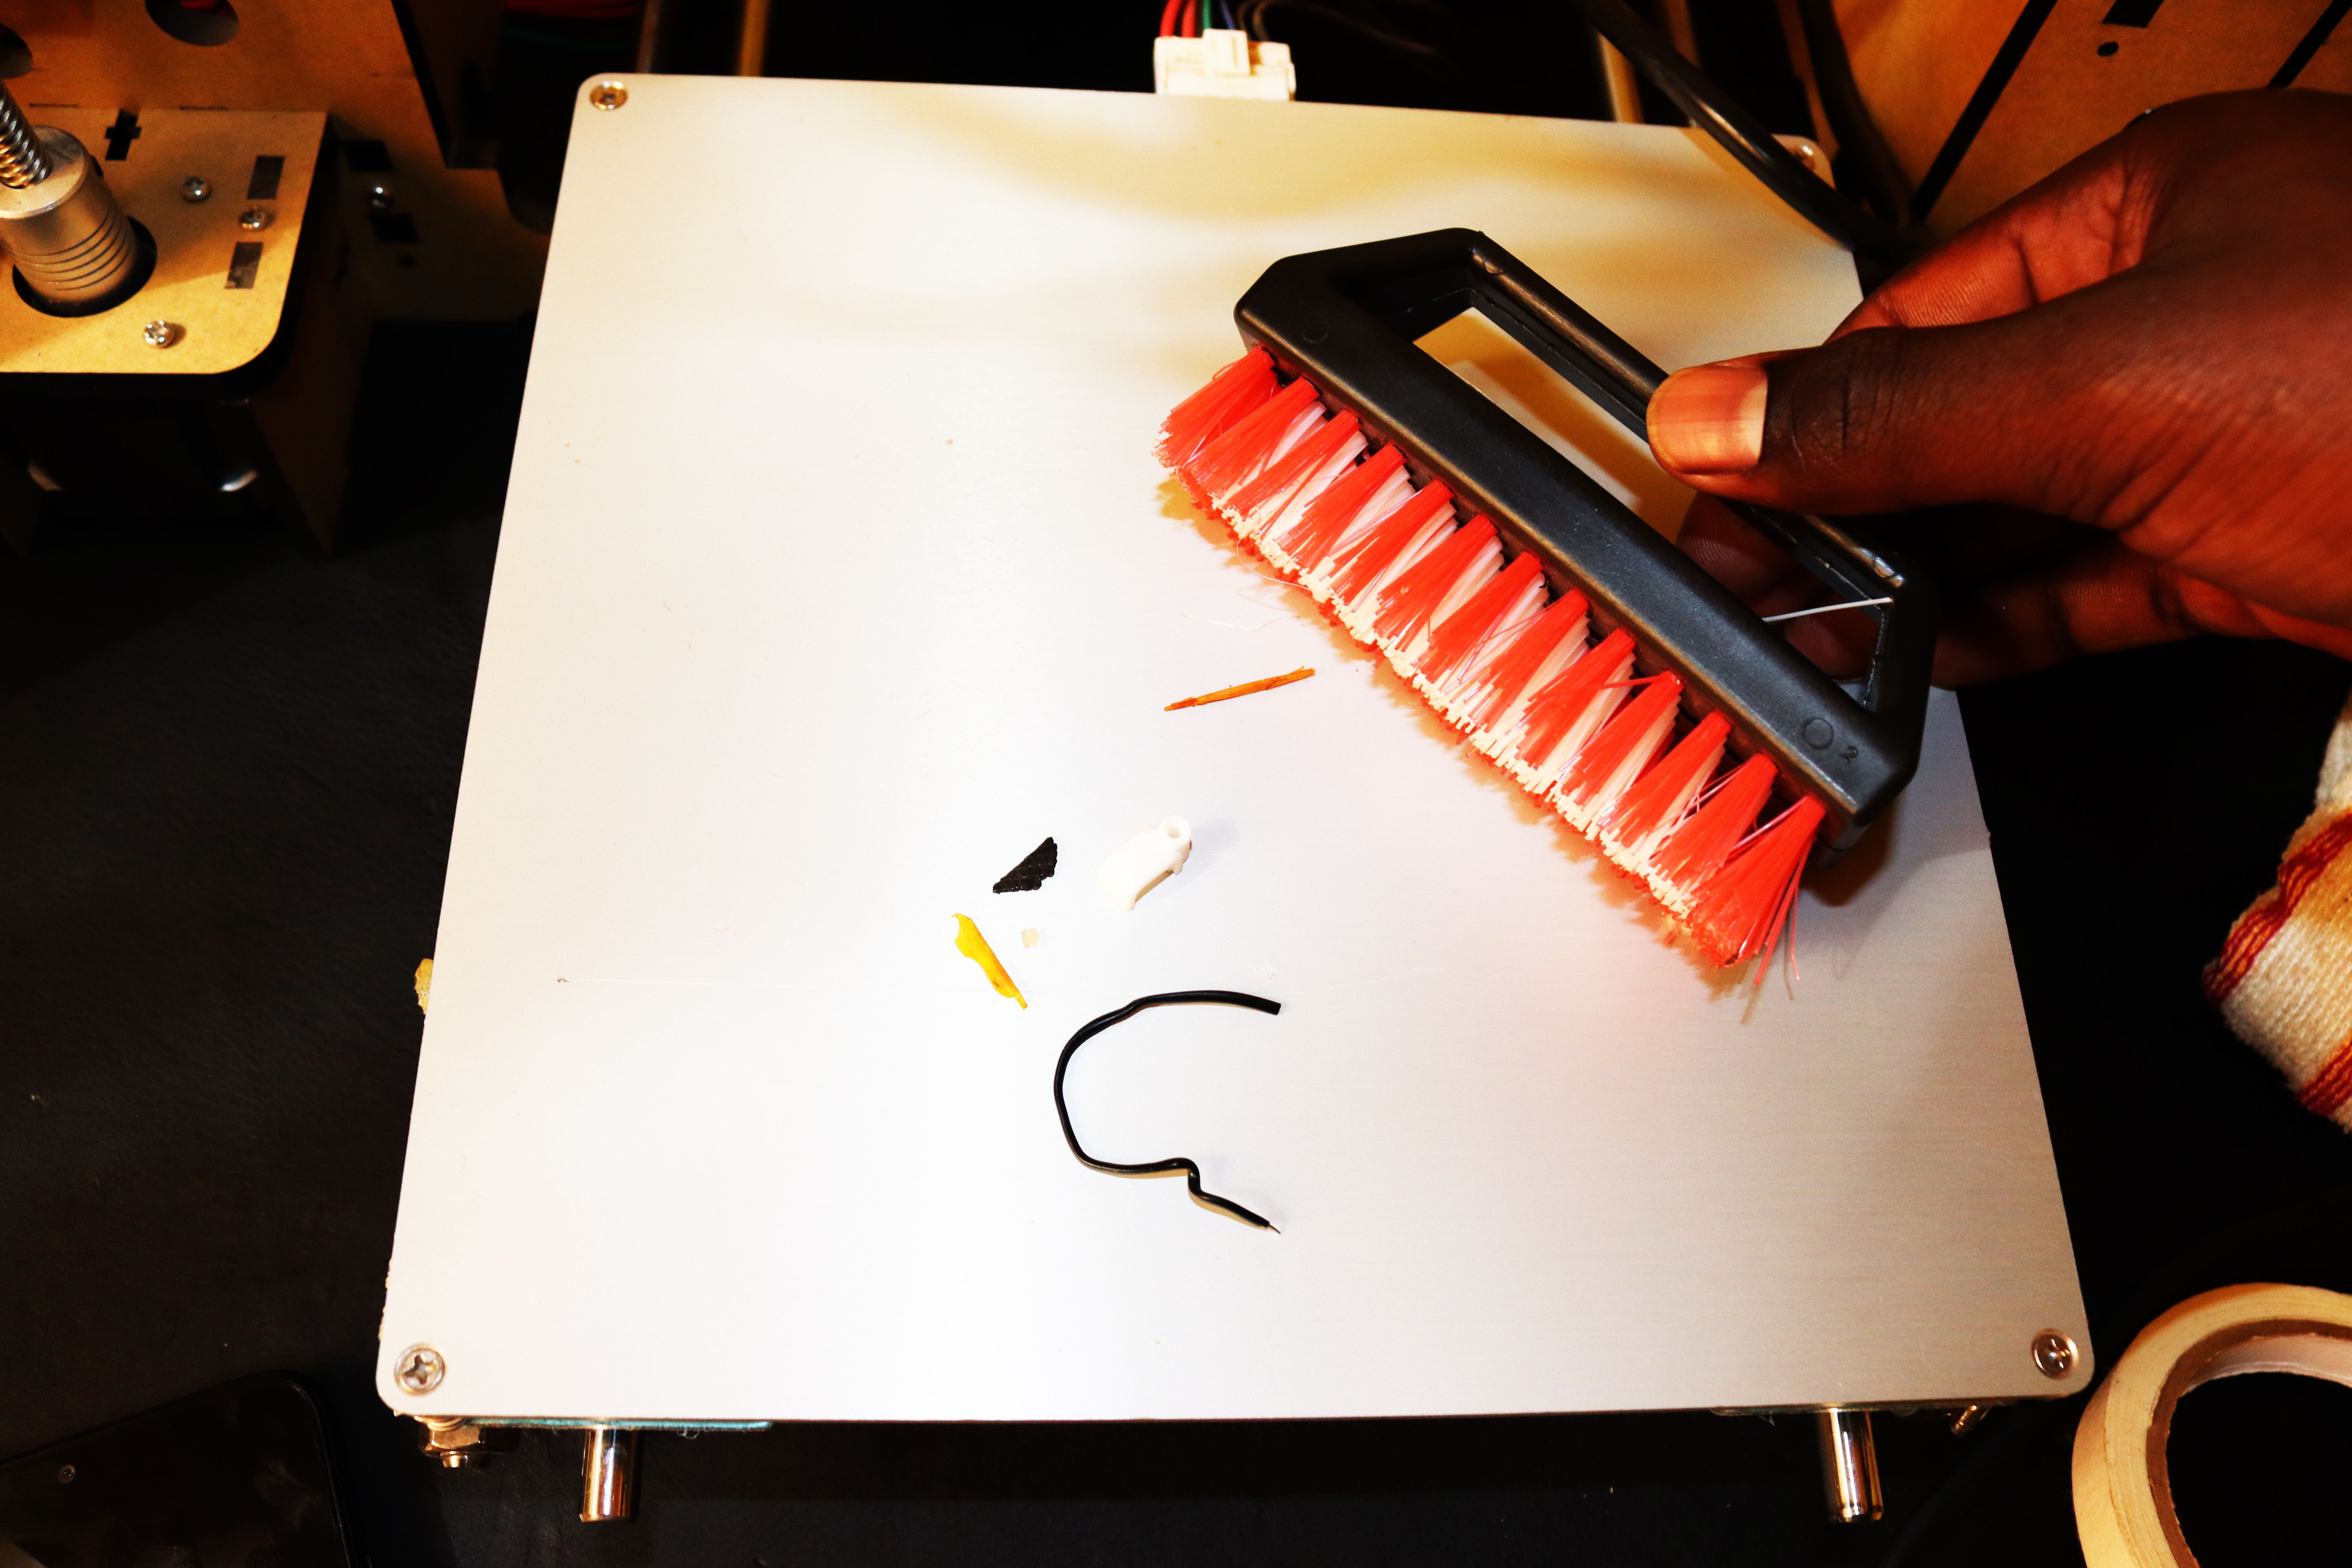 Using the brush to remove dirt and debri from the 3D printer bed